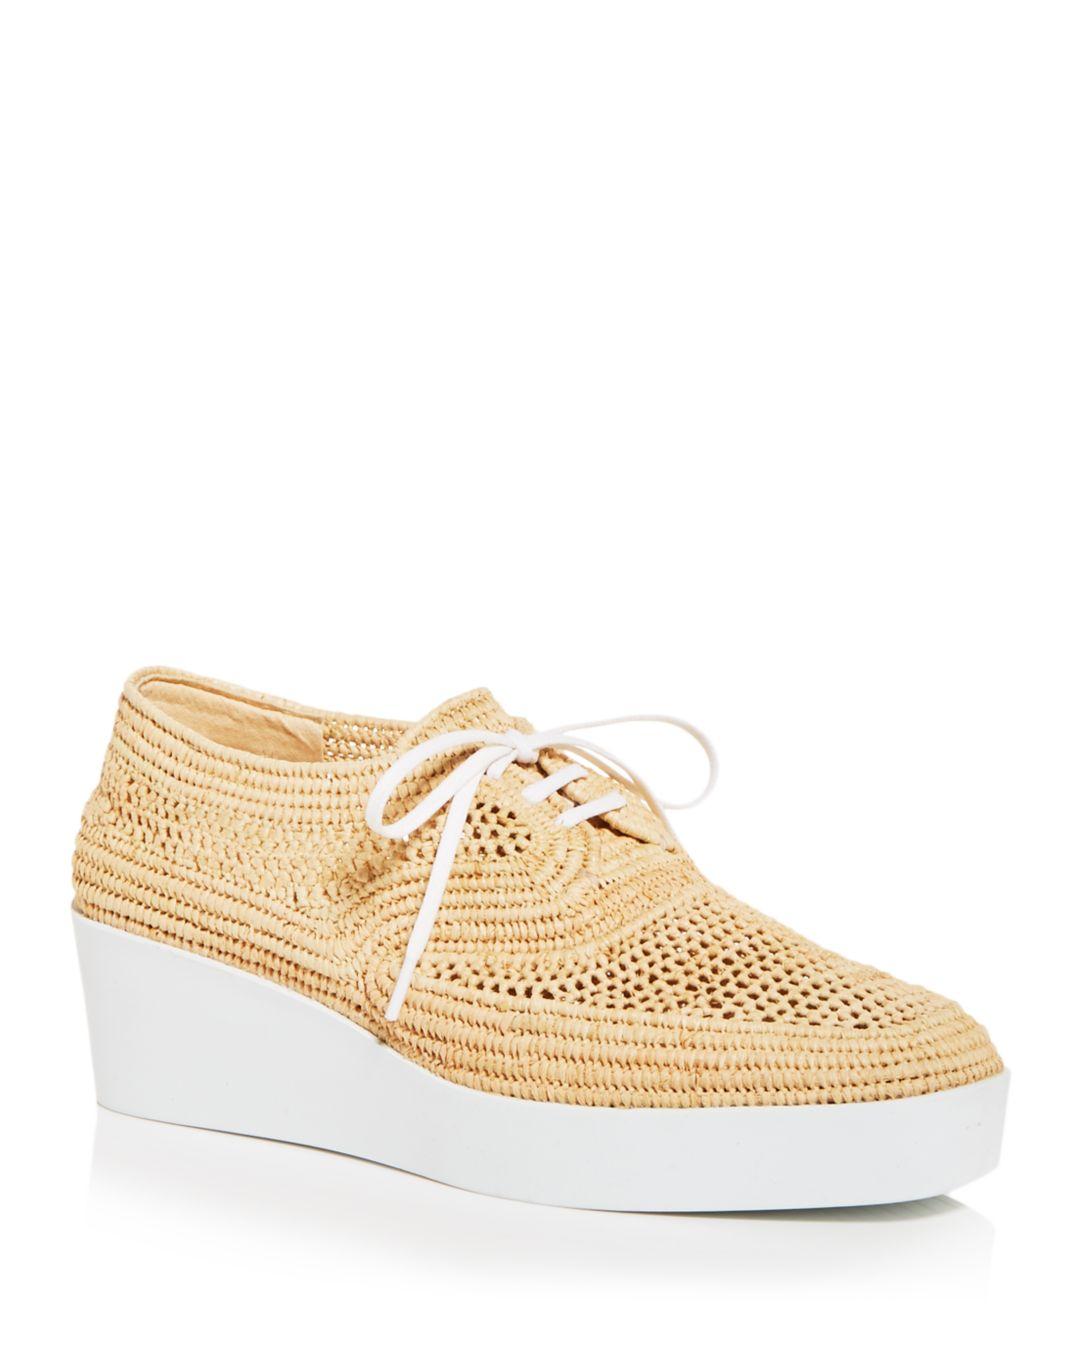 Robert Clergerie Lisa Woven Wedge Platform Oxfords in Natural | Lyst